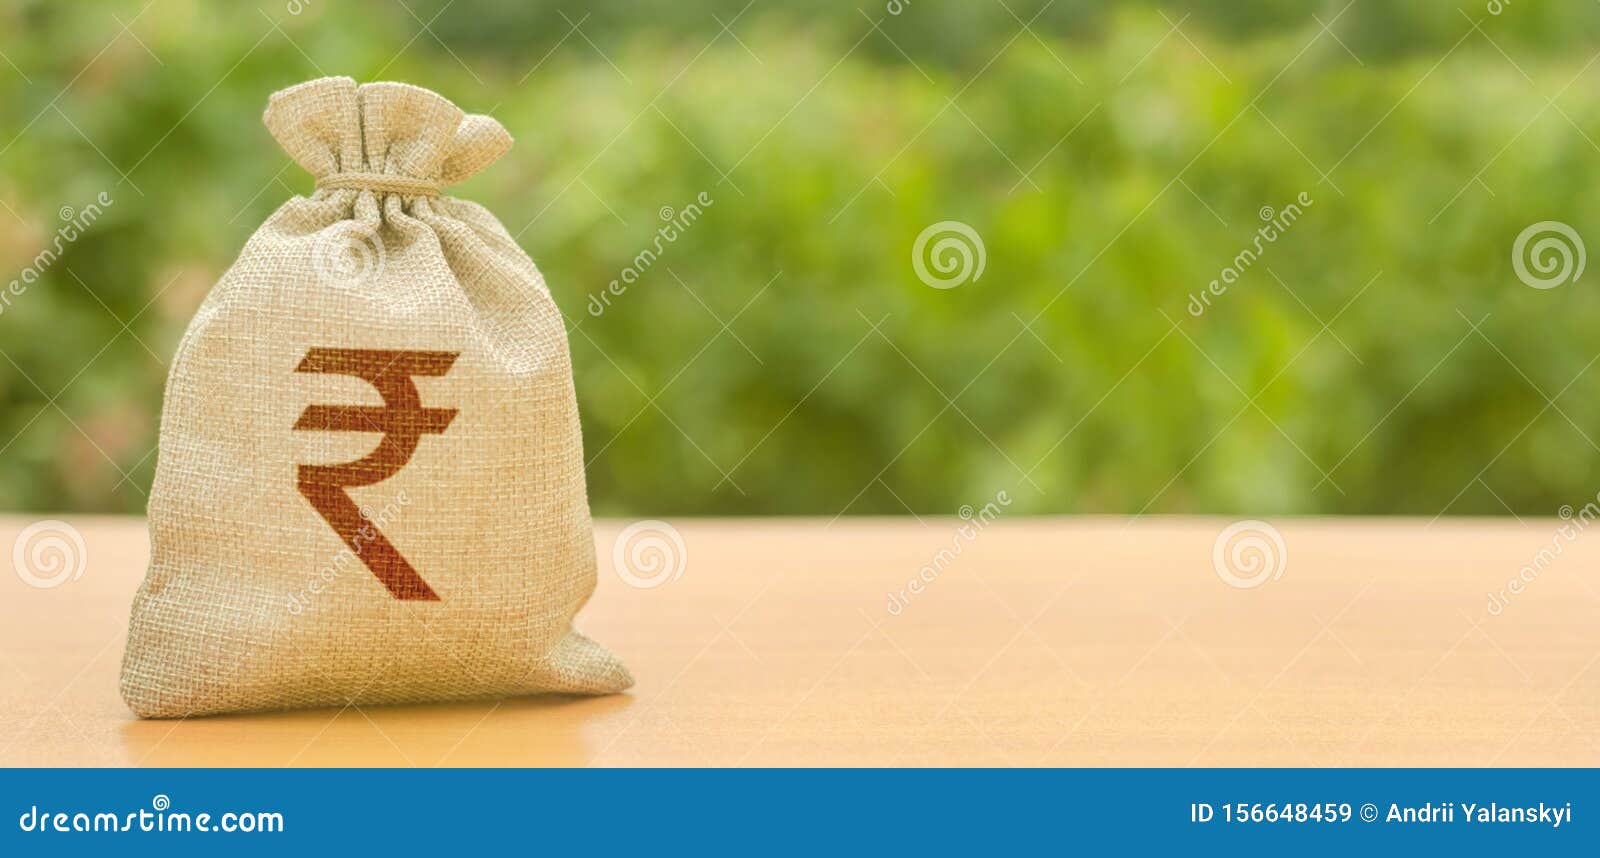 Money Bag Rupee: Over 1,200 Royalty-Free Licensable Stock Illustrations &  Drawings | Shutterstock